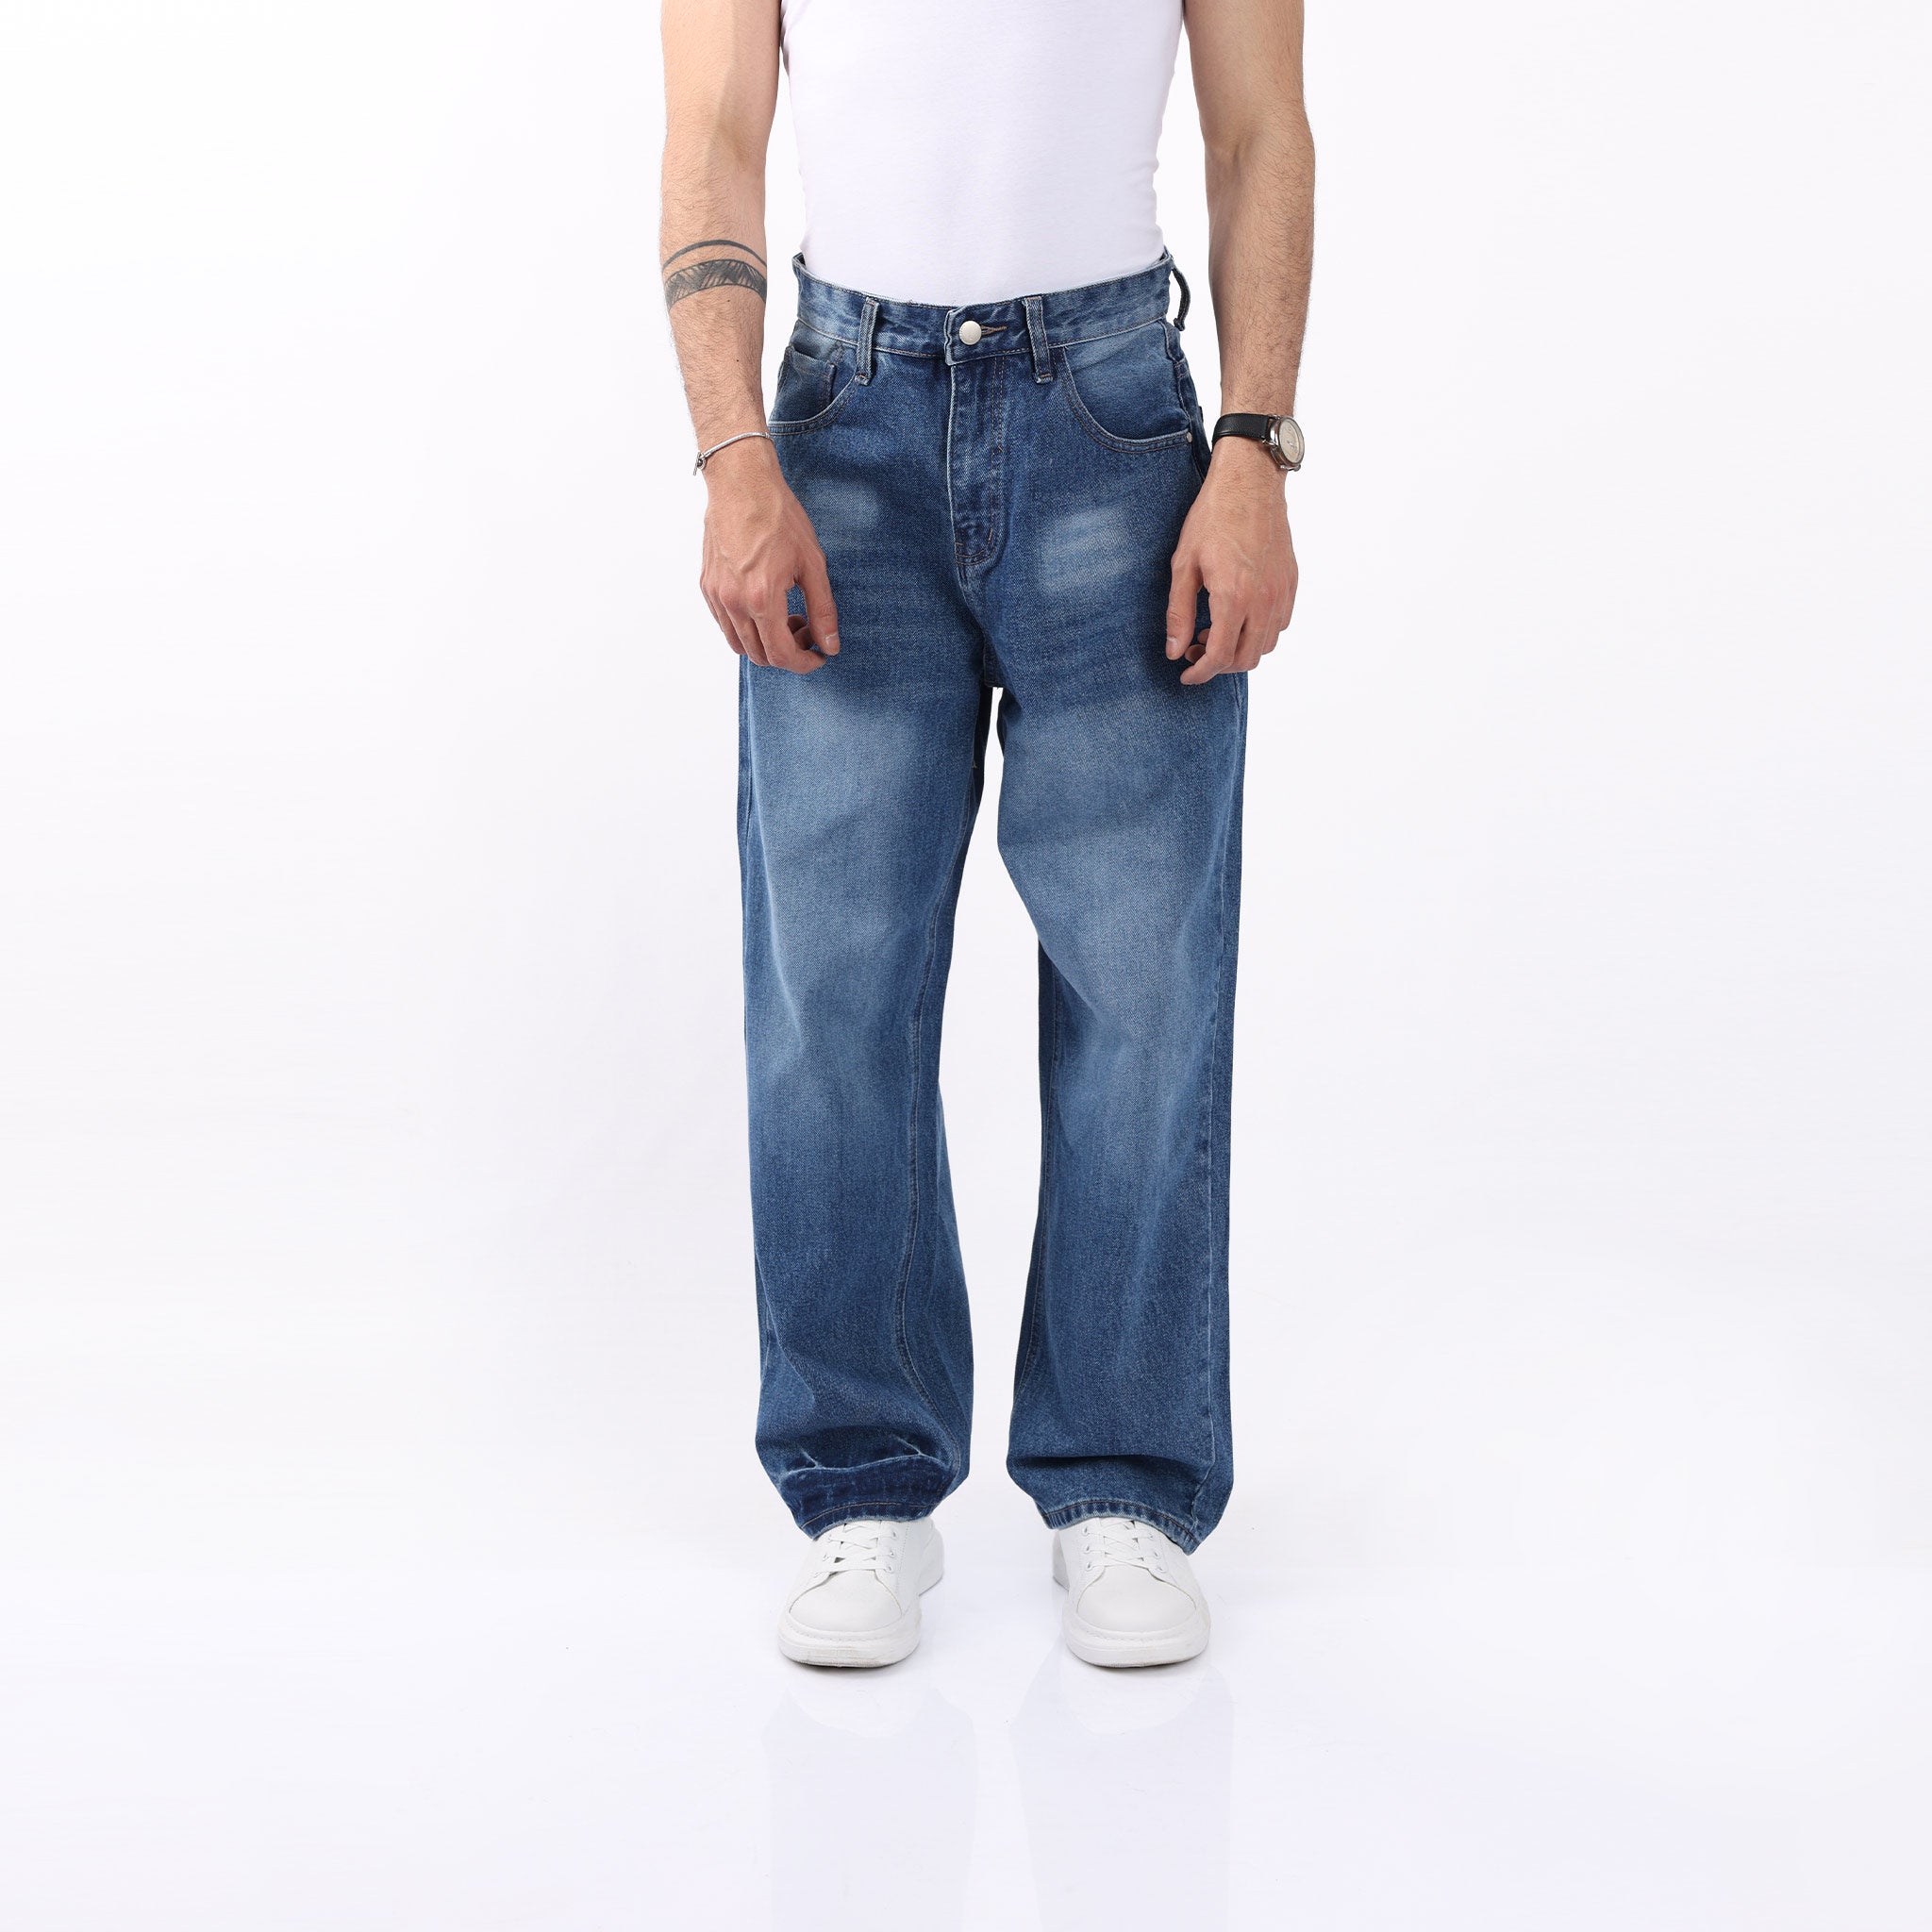 Faded Straight Fit Jeans Pants